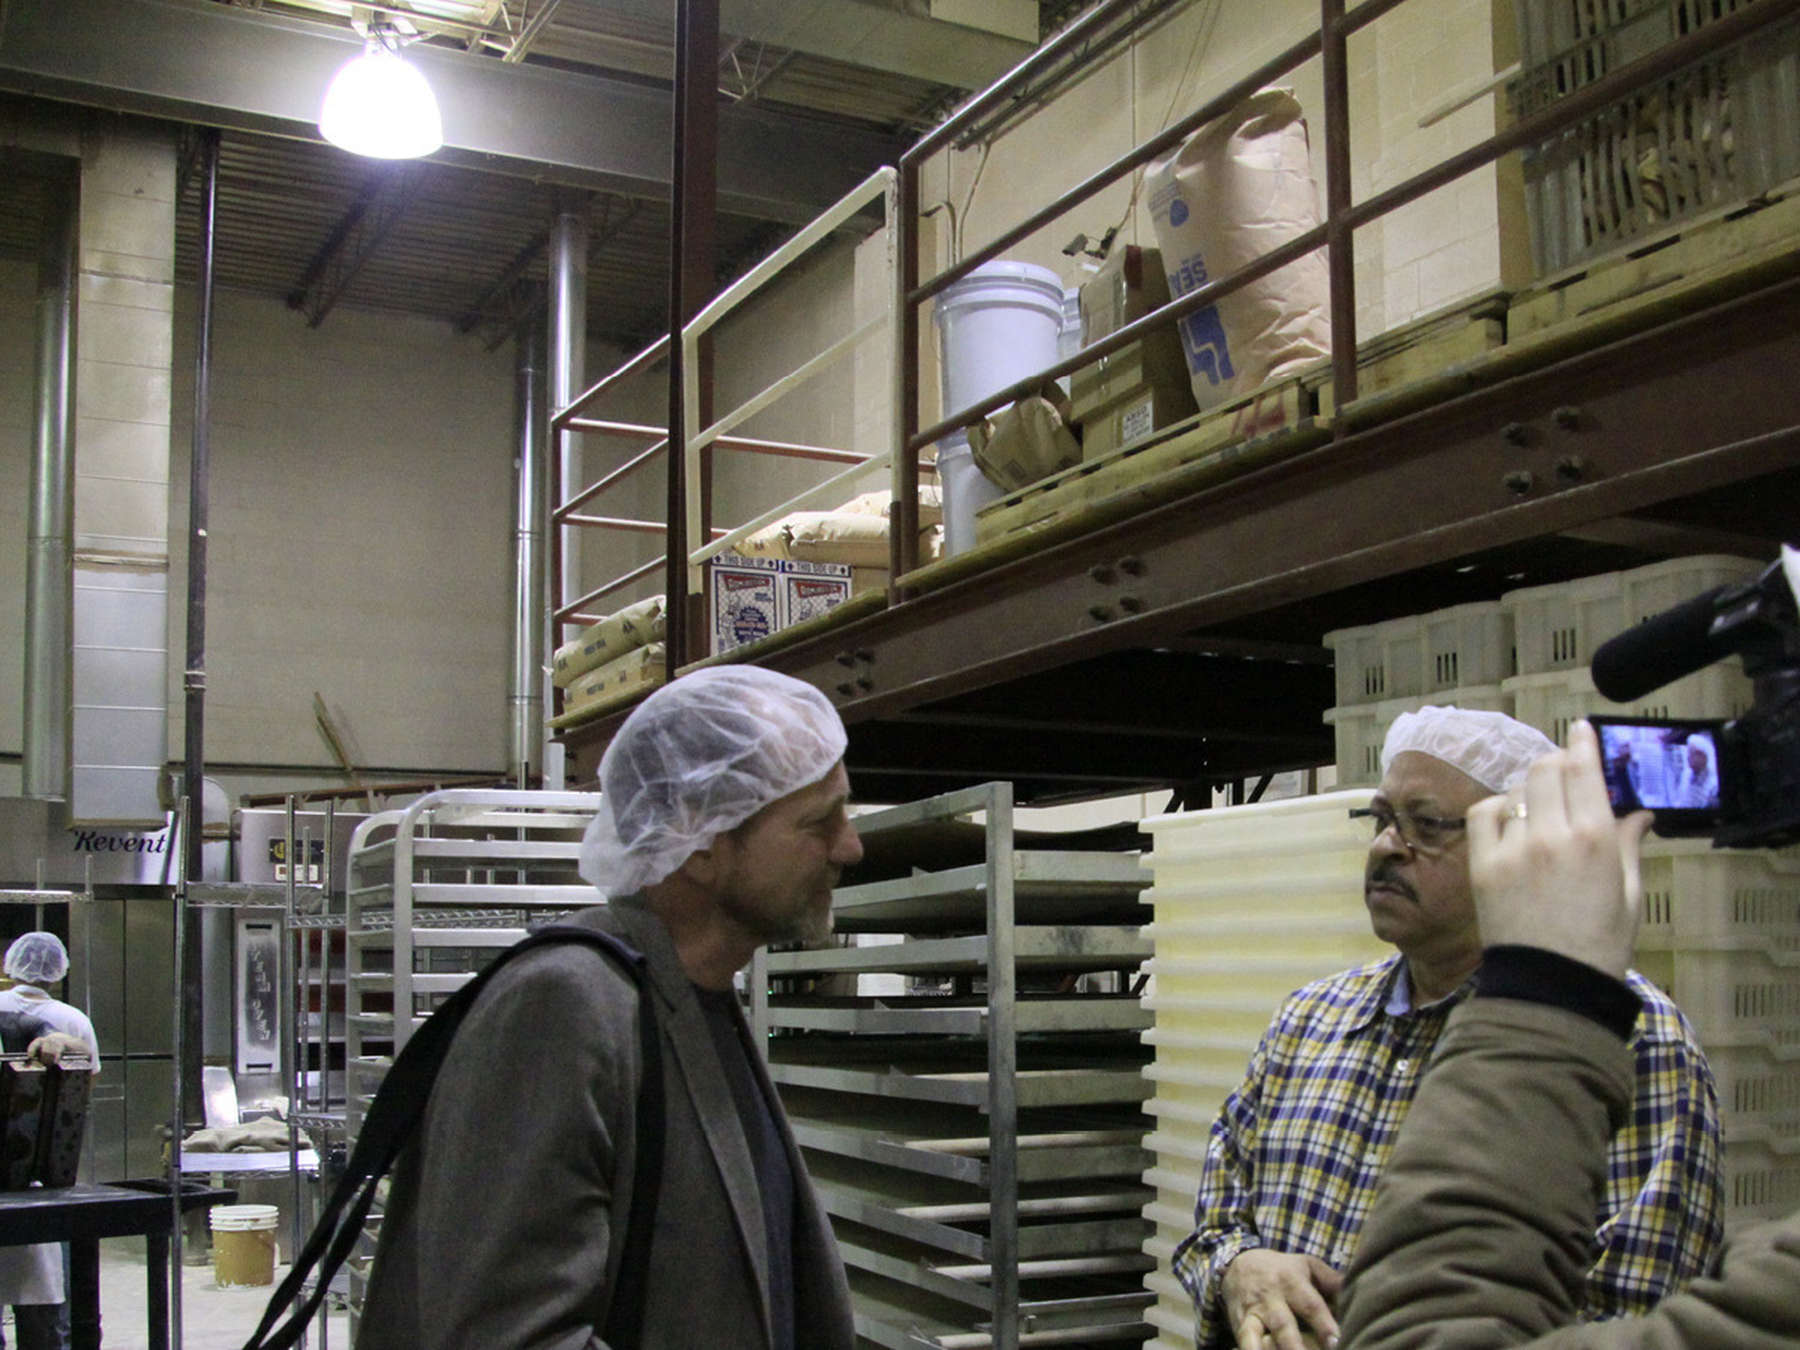 Interview of workers at the Hunts Points Food Distribution Center (Bronx) as part of the Lifelines video.